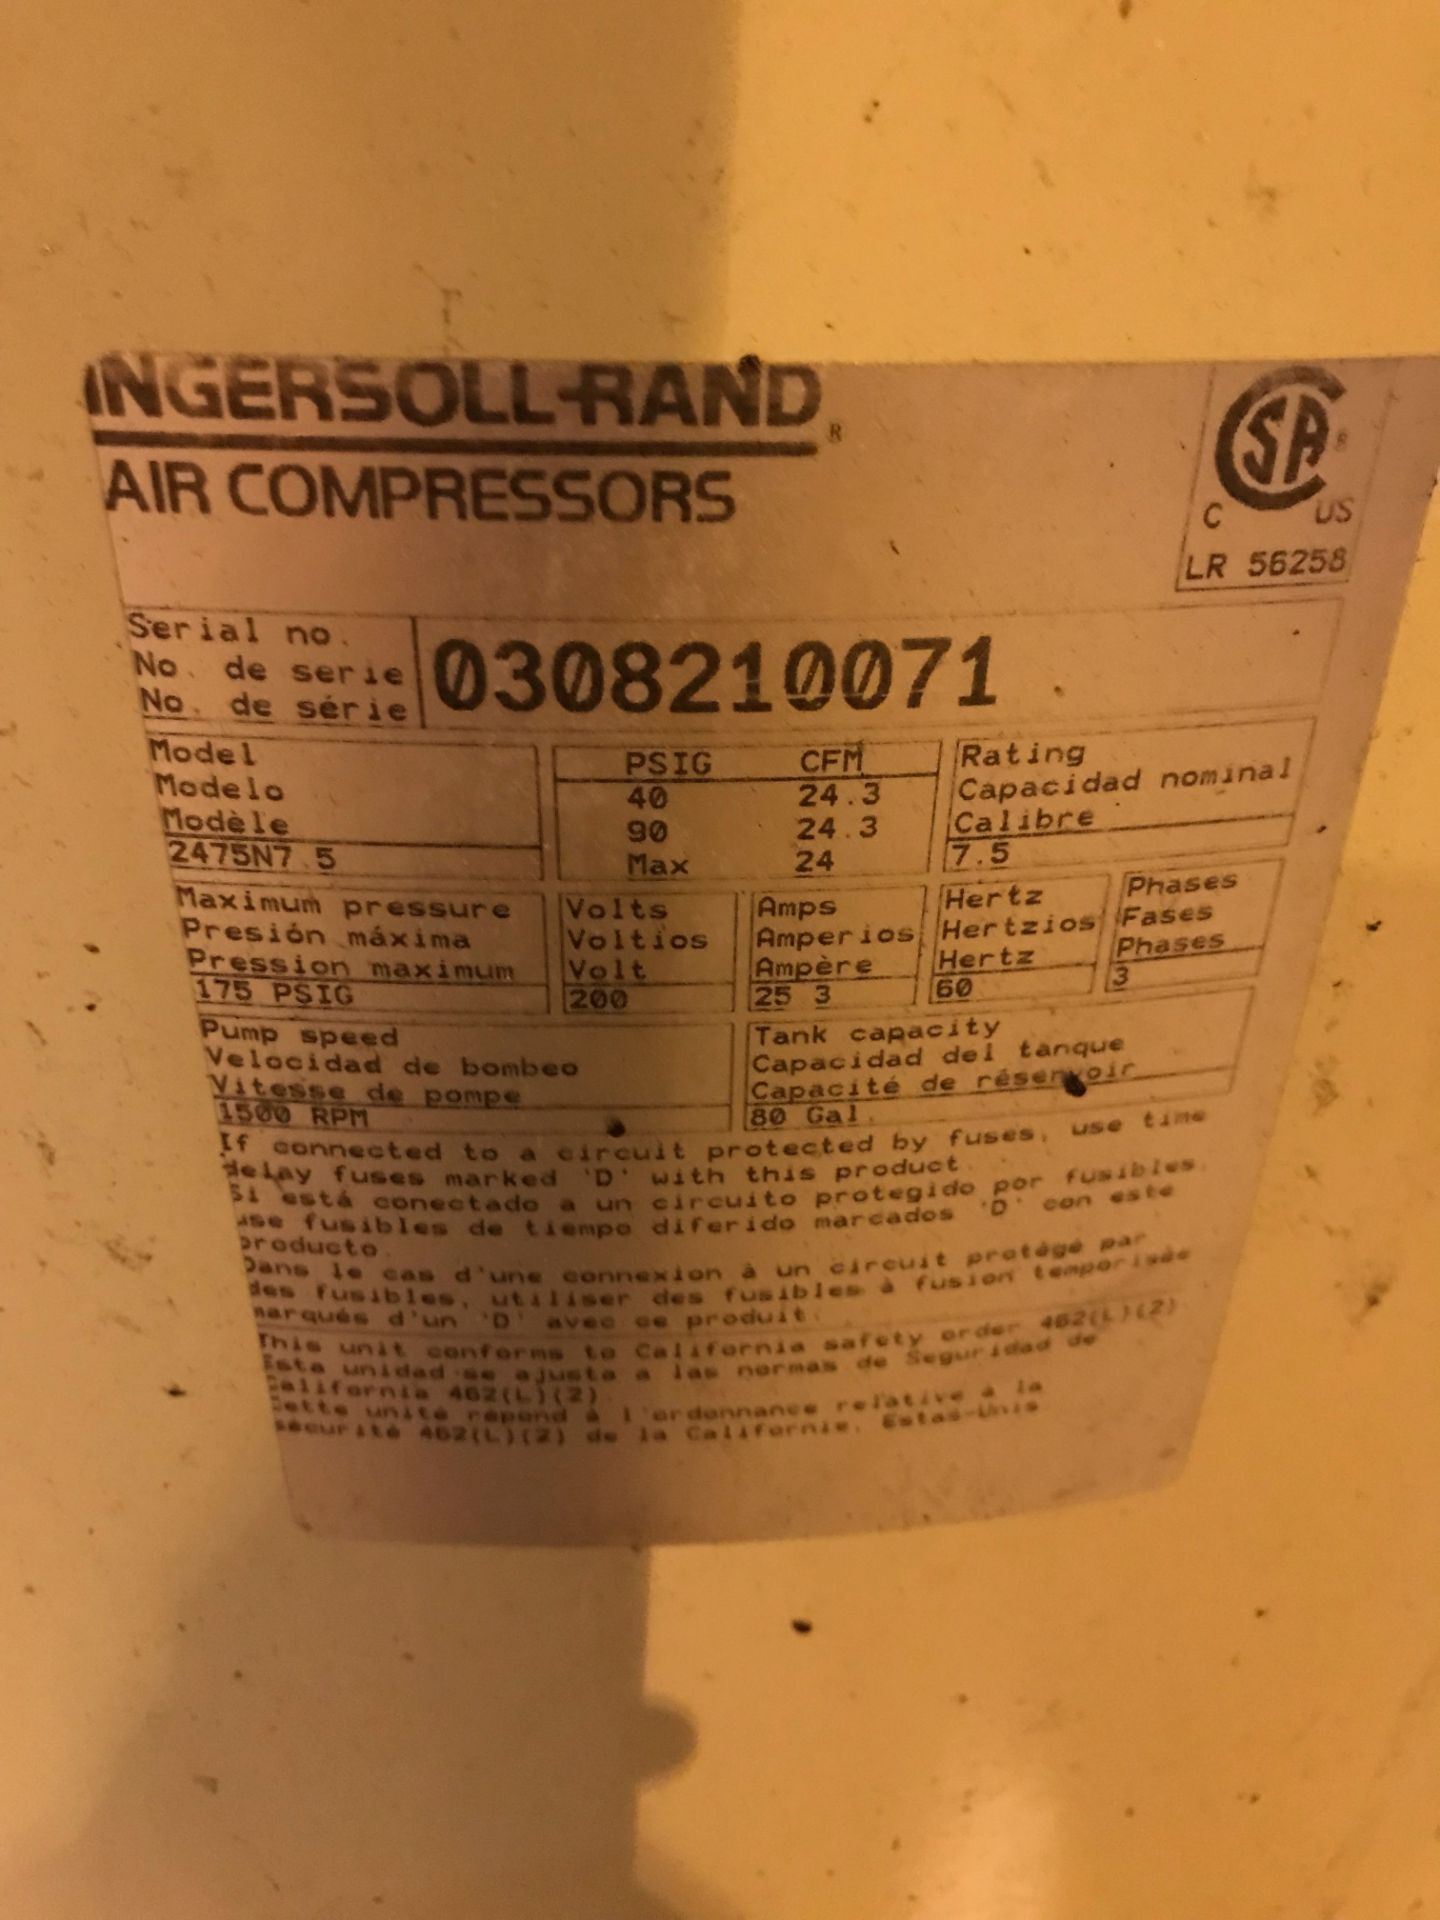 Ingersoll Rand Air Compressor, Model# 2475N75, Serial# 0308210071, 175 PSIG, 200 Volts, 25 Amps, - Image 2 of 3